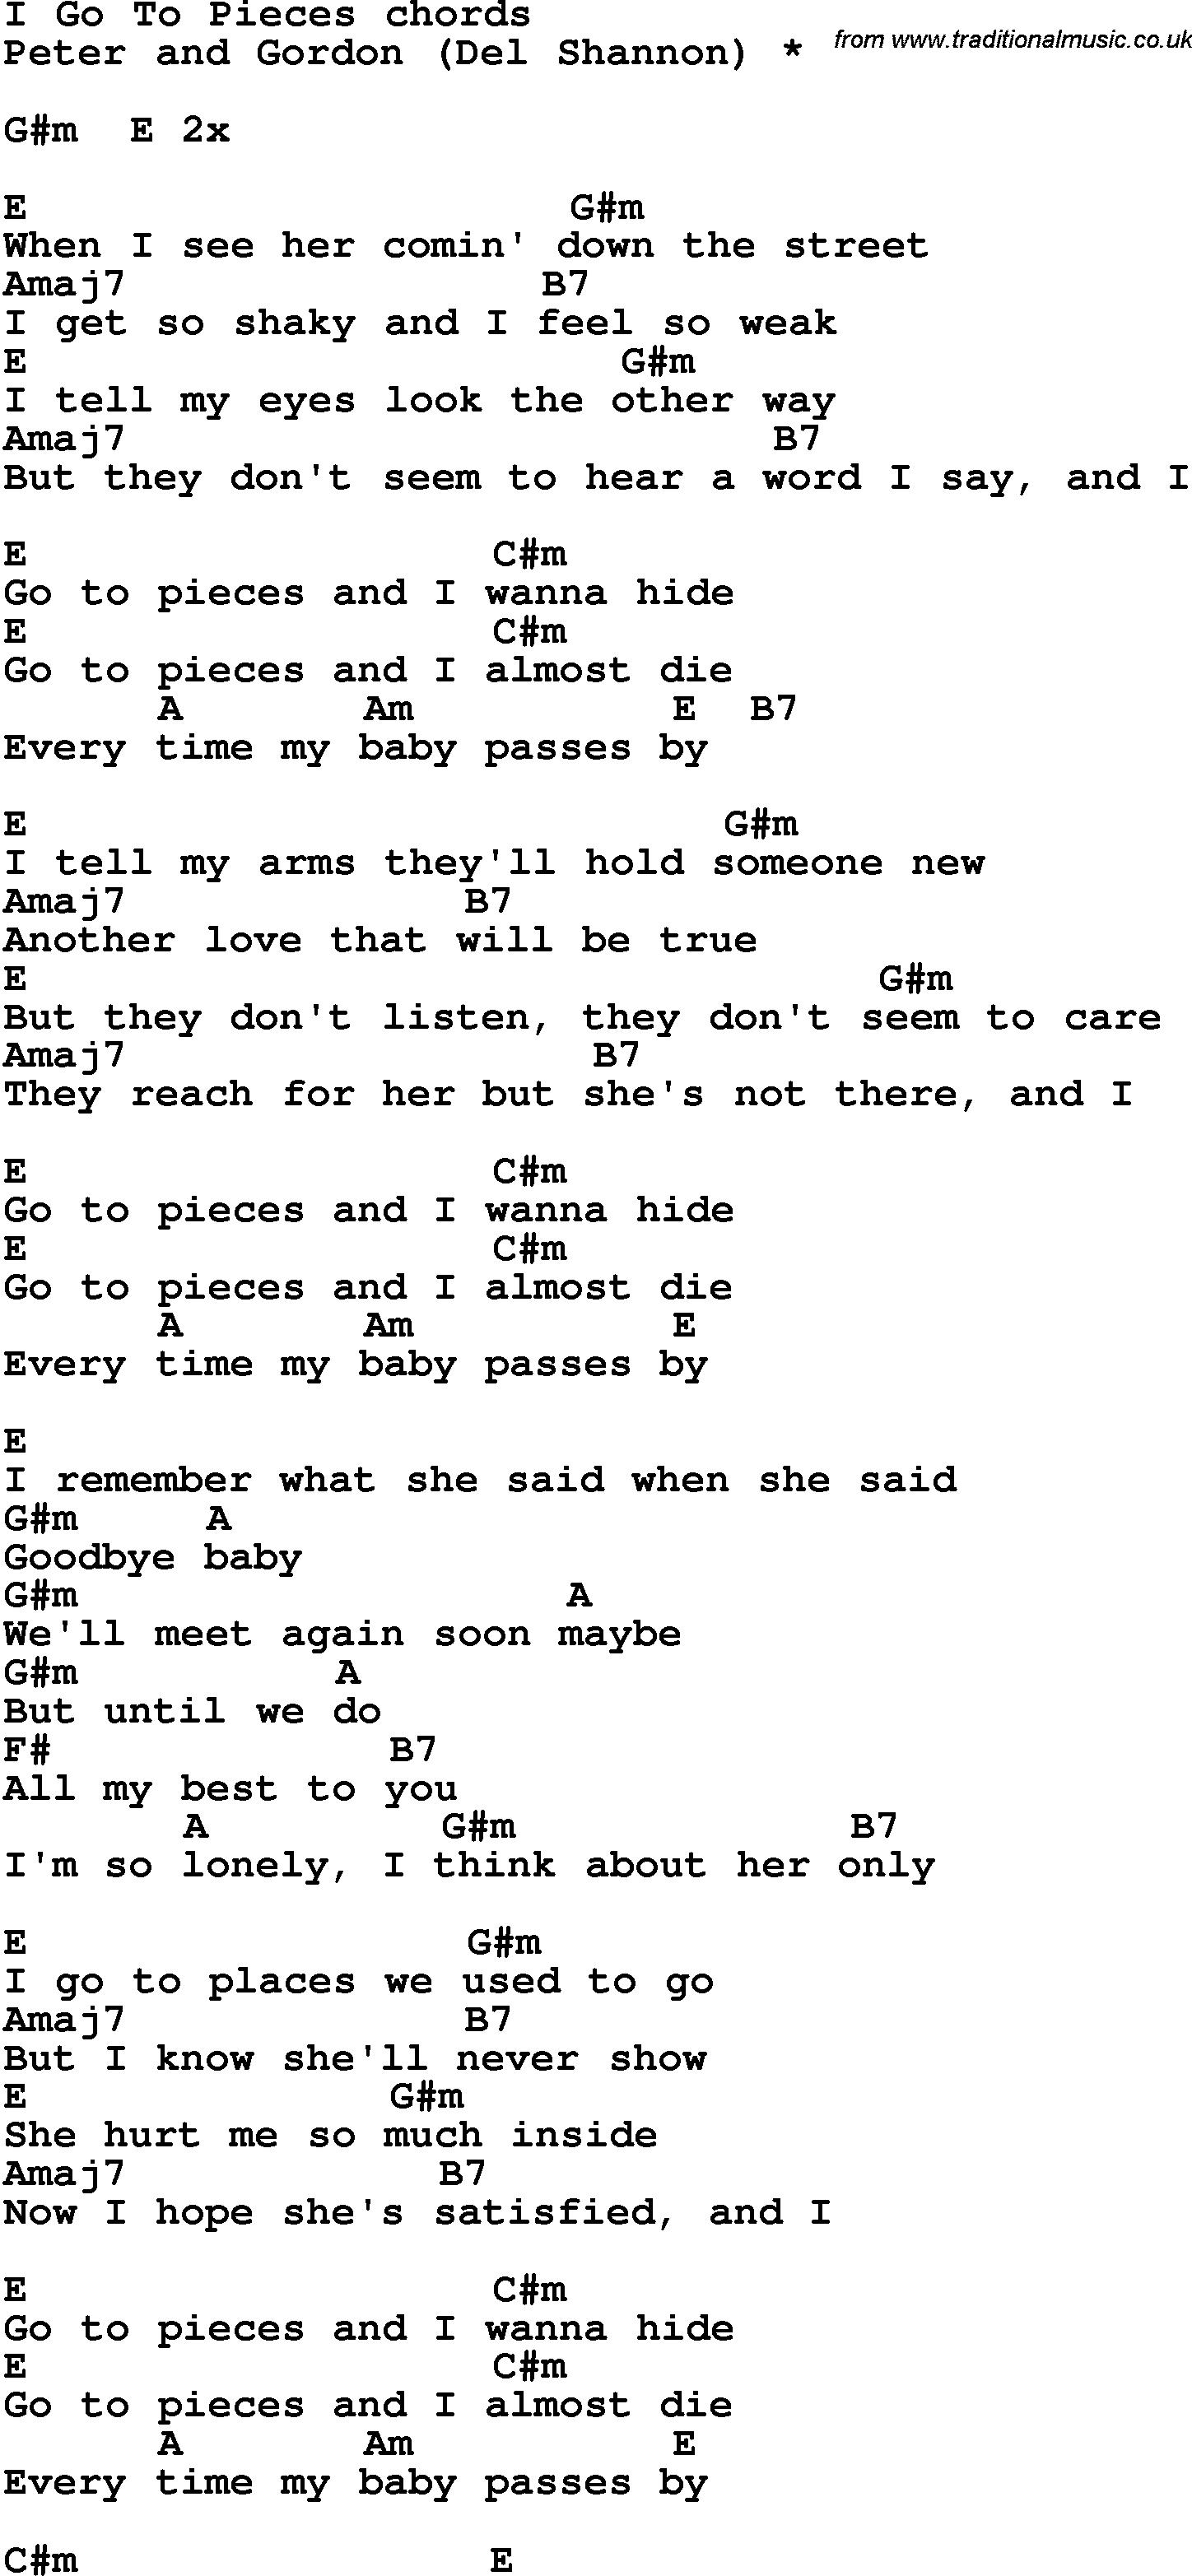 Song Lyrics with guitar chords for I Go To Piece